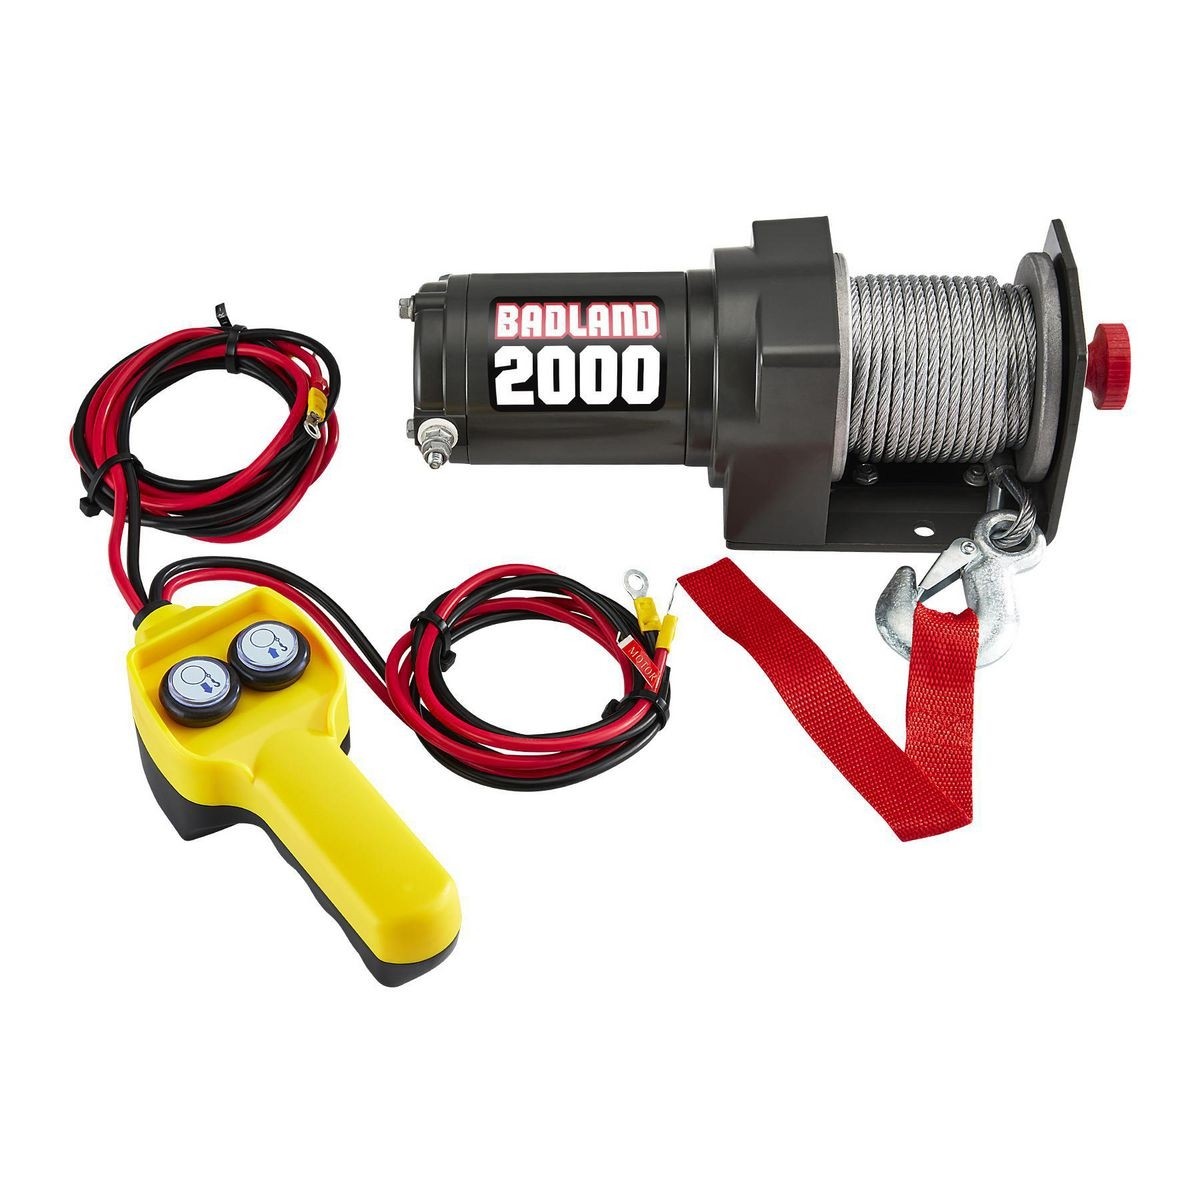 BADLAND 2000 Lb. Utility Trailer Winch – Item 57365 – Harbor Freight How To Use Badland Winch Without Remote